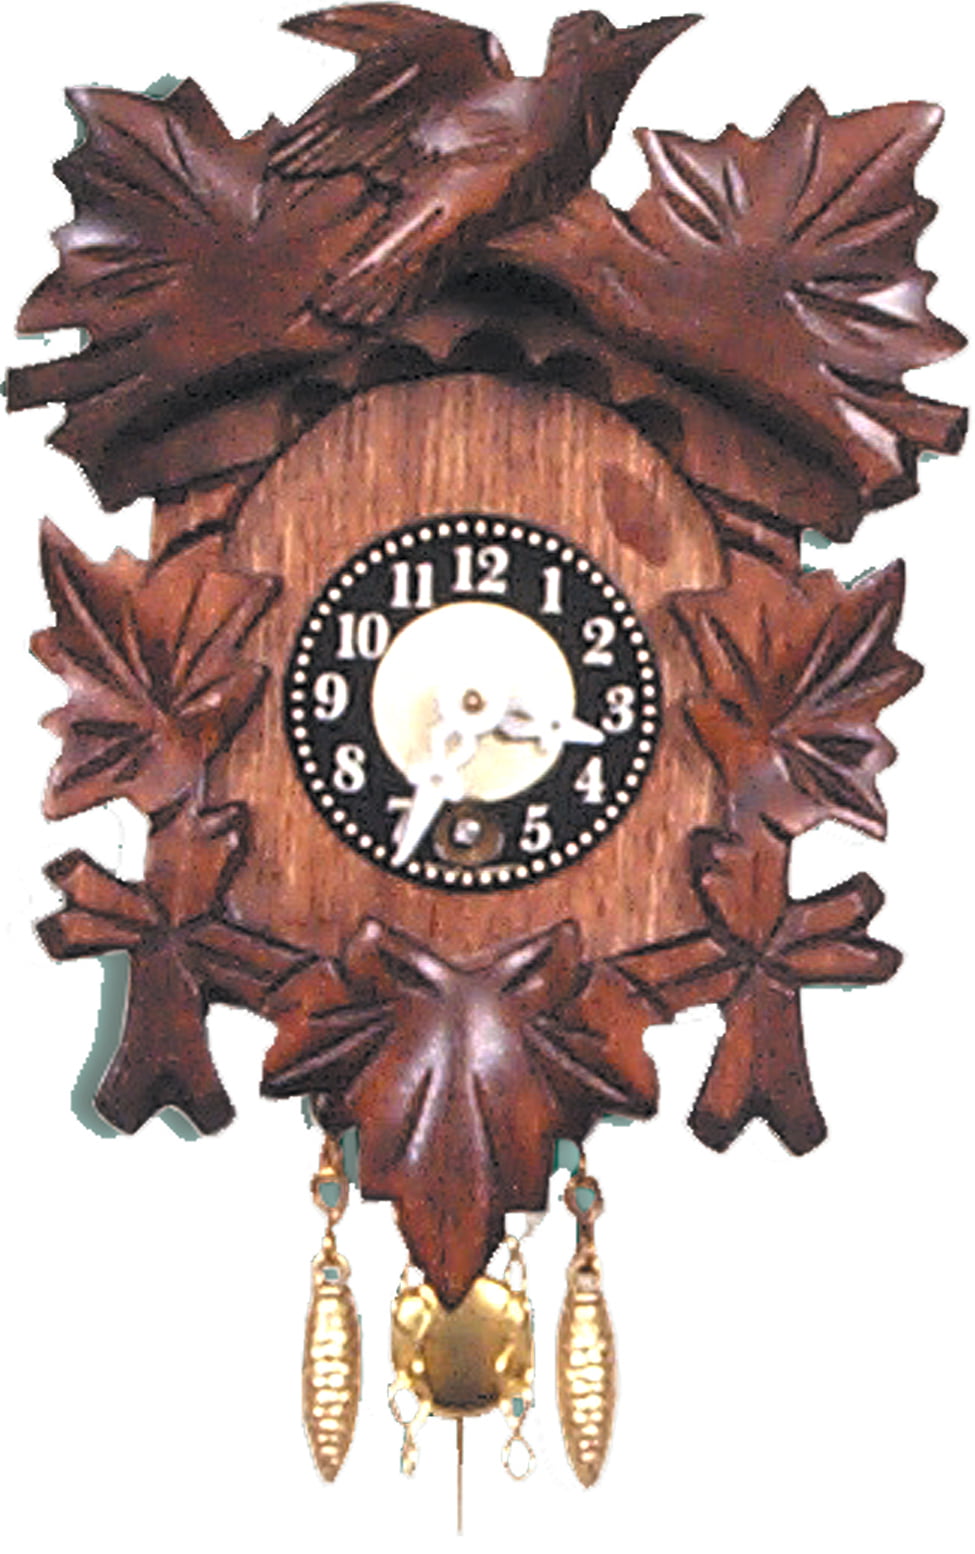 Vintage Old Wooden Leaves Birds Cuckoo Clock Parts Top Topper Trim 6 1/2" #17a 